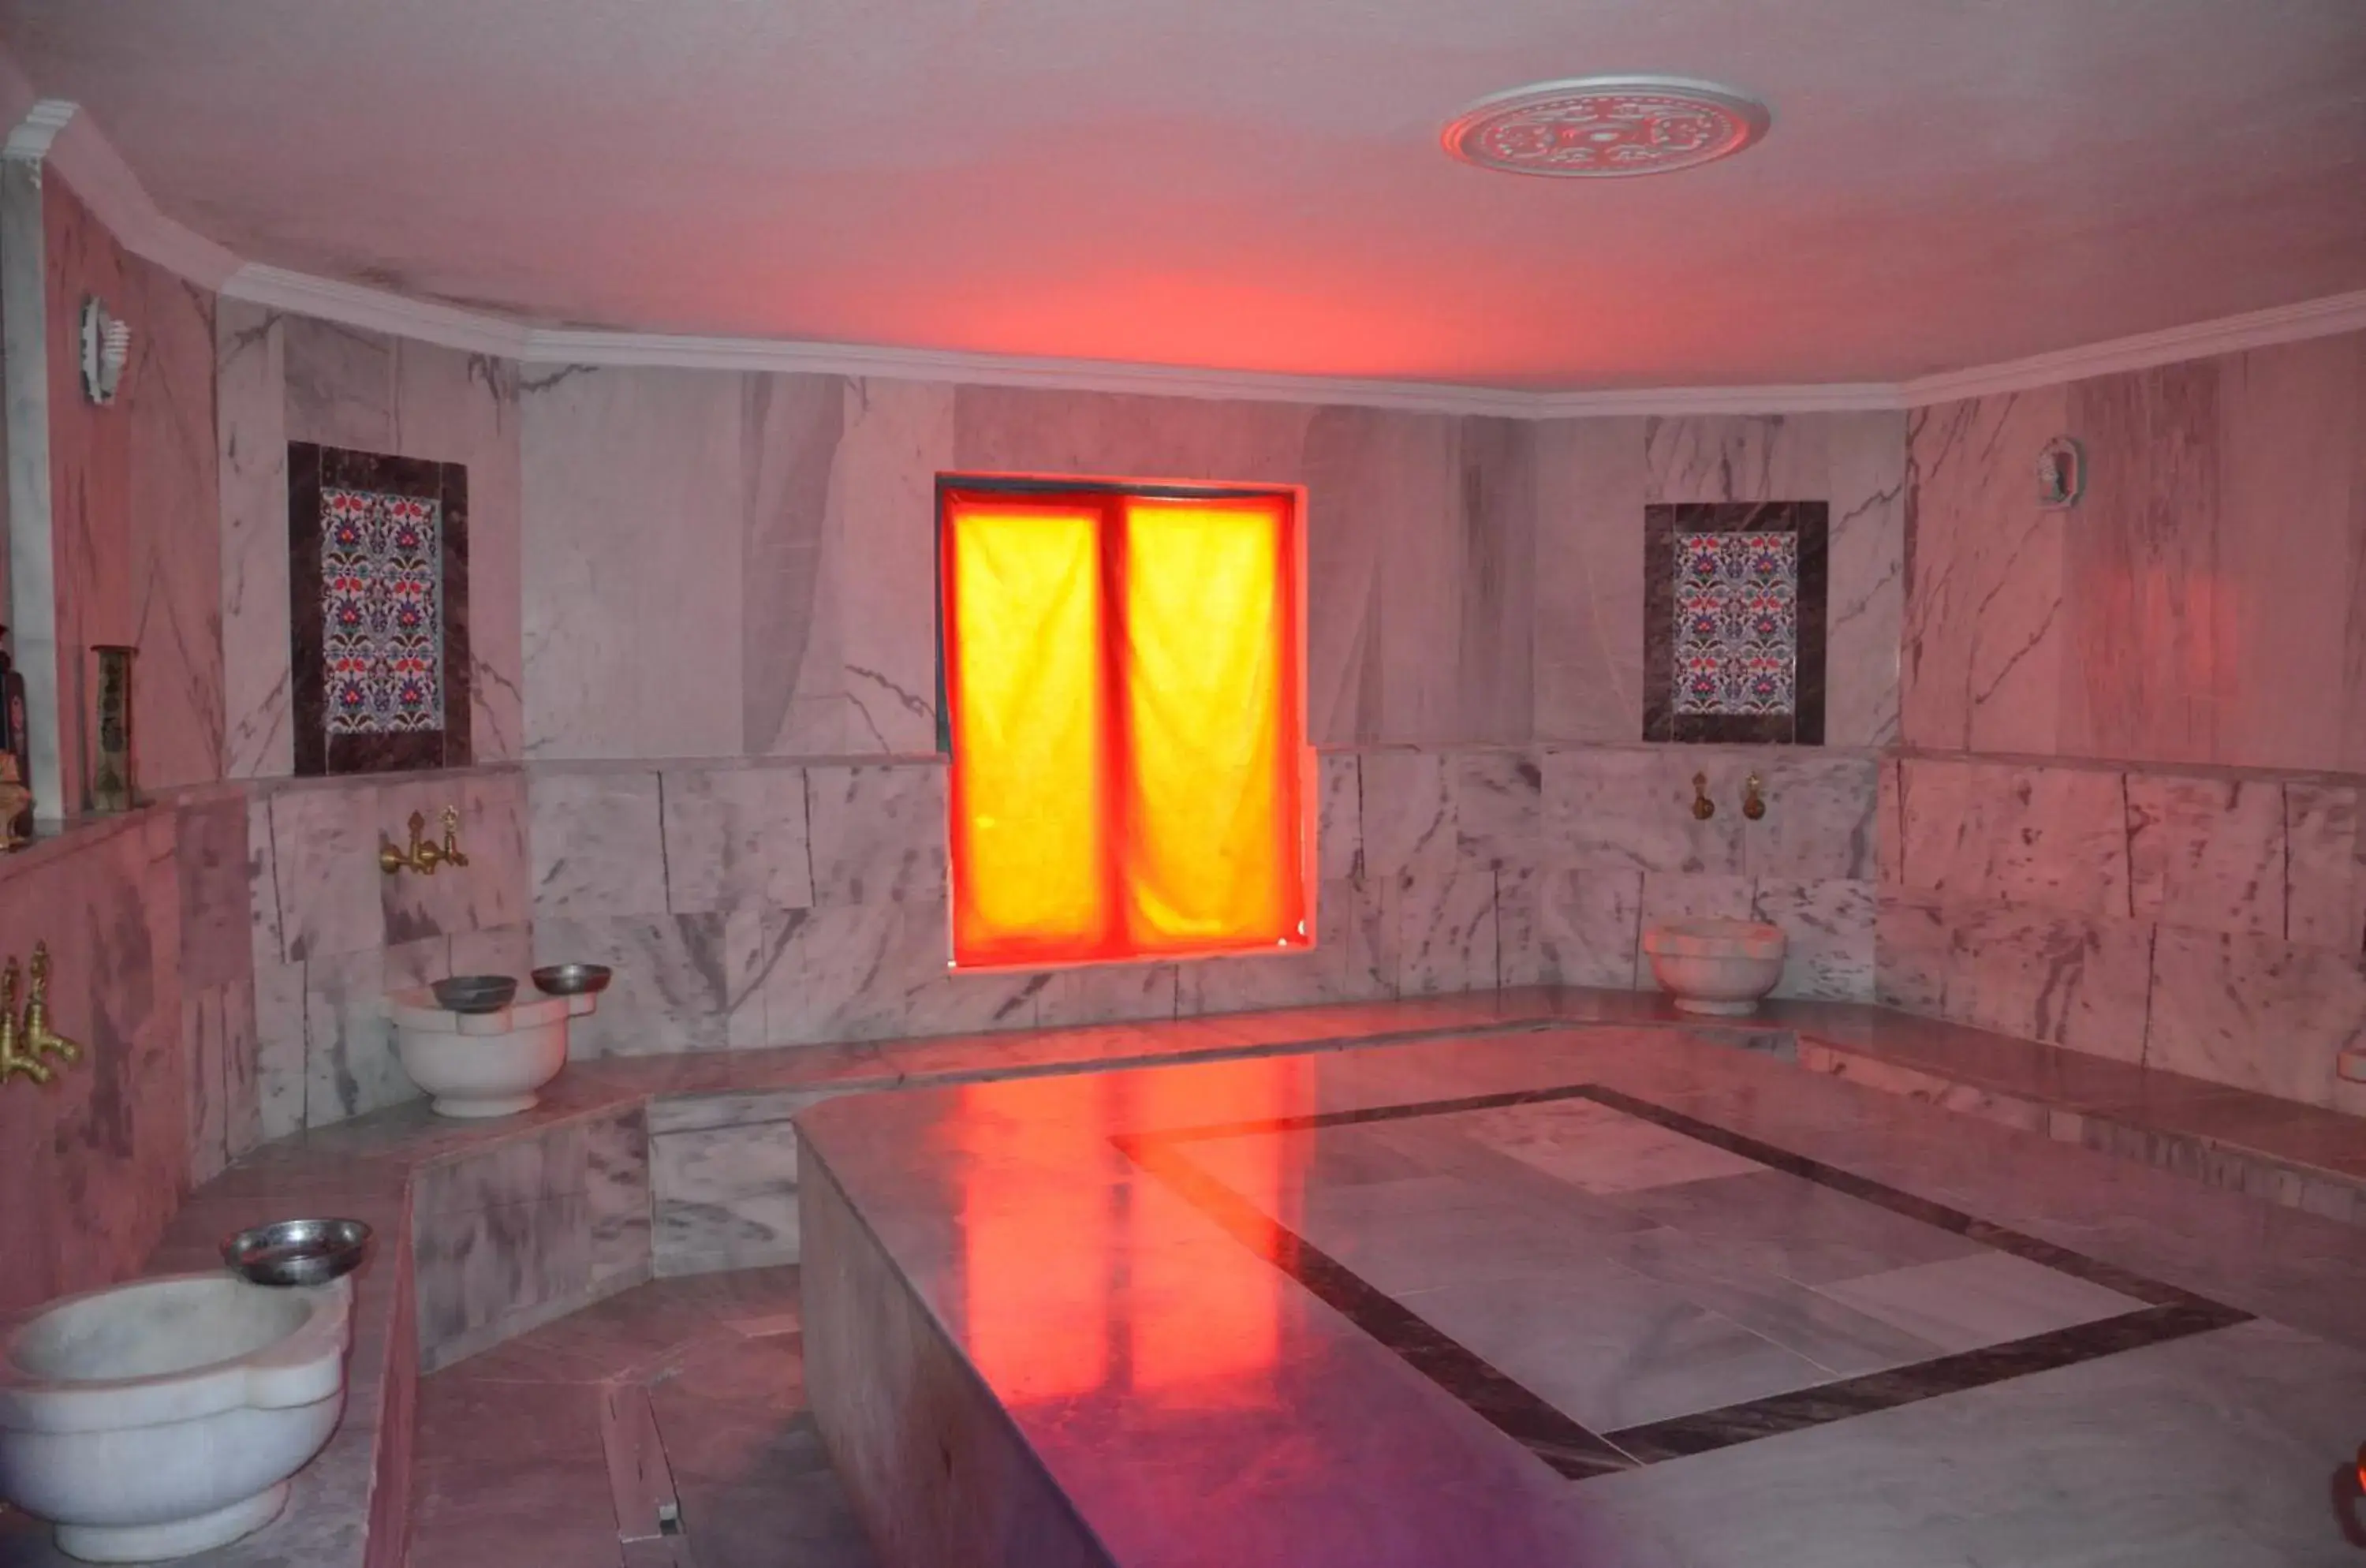 Steam room, Swimming Pool in Cinar Family Suite Hotel - Side